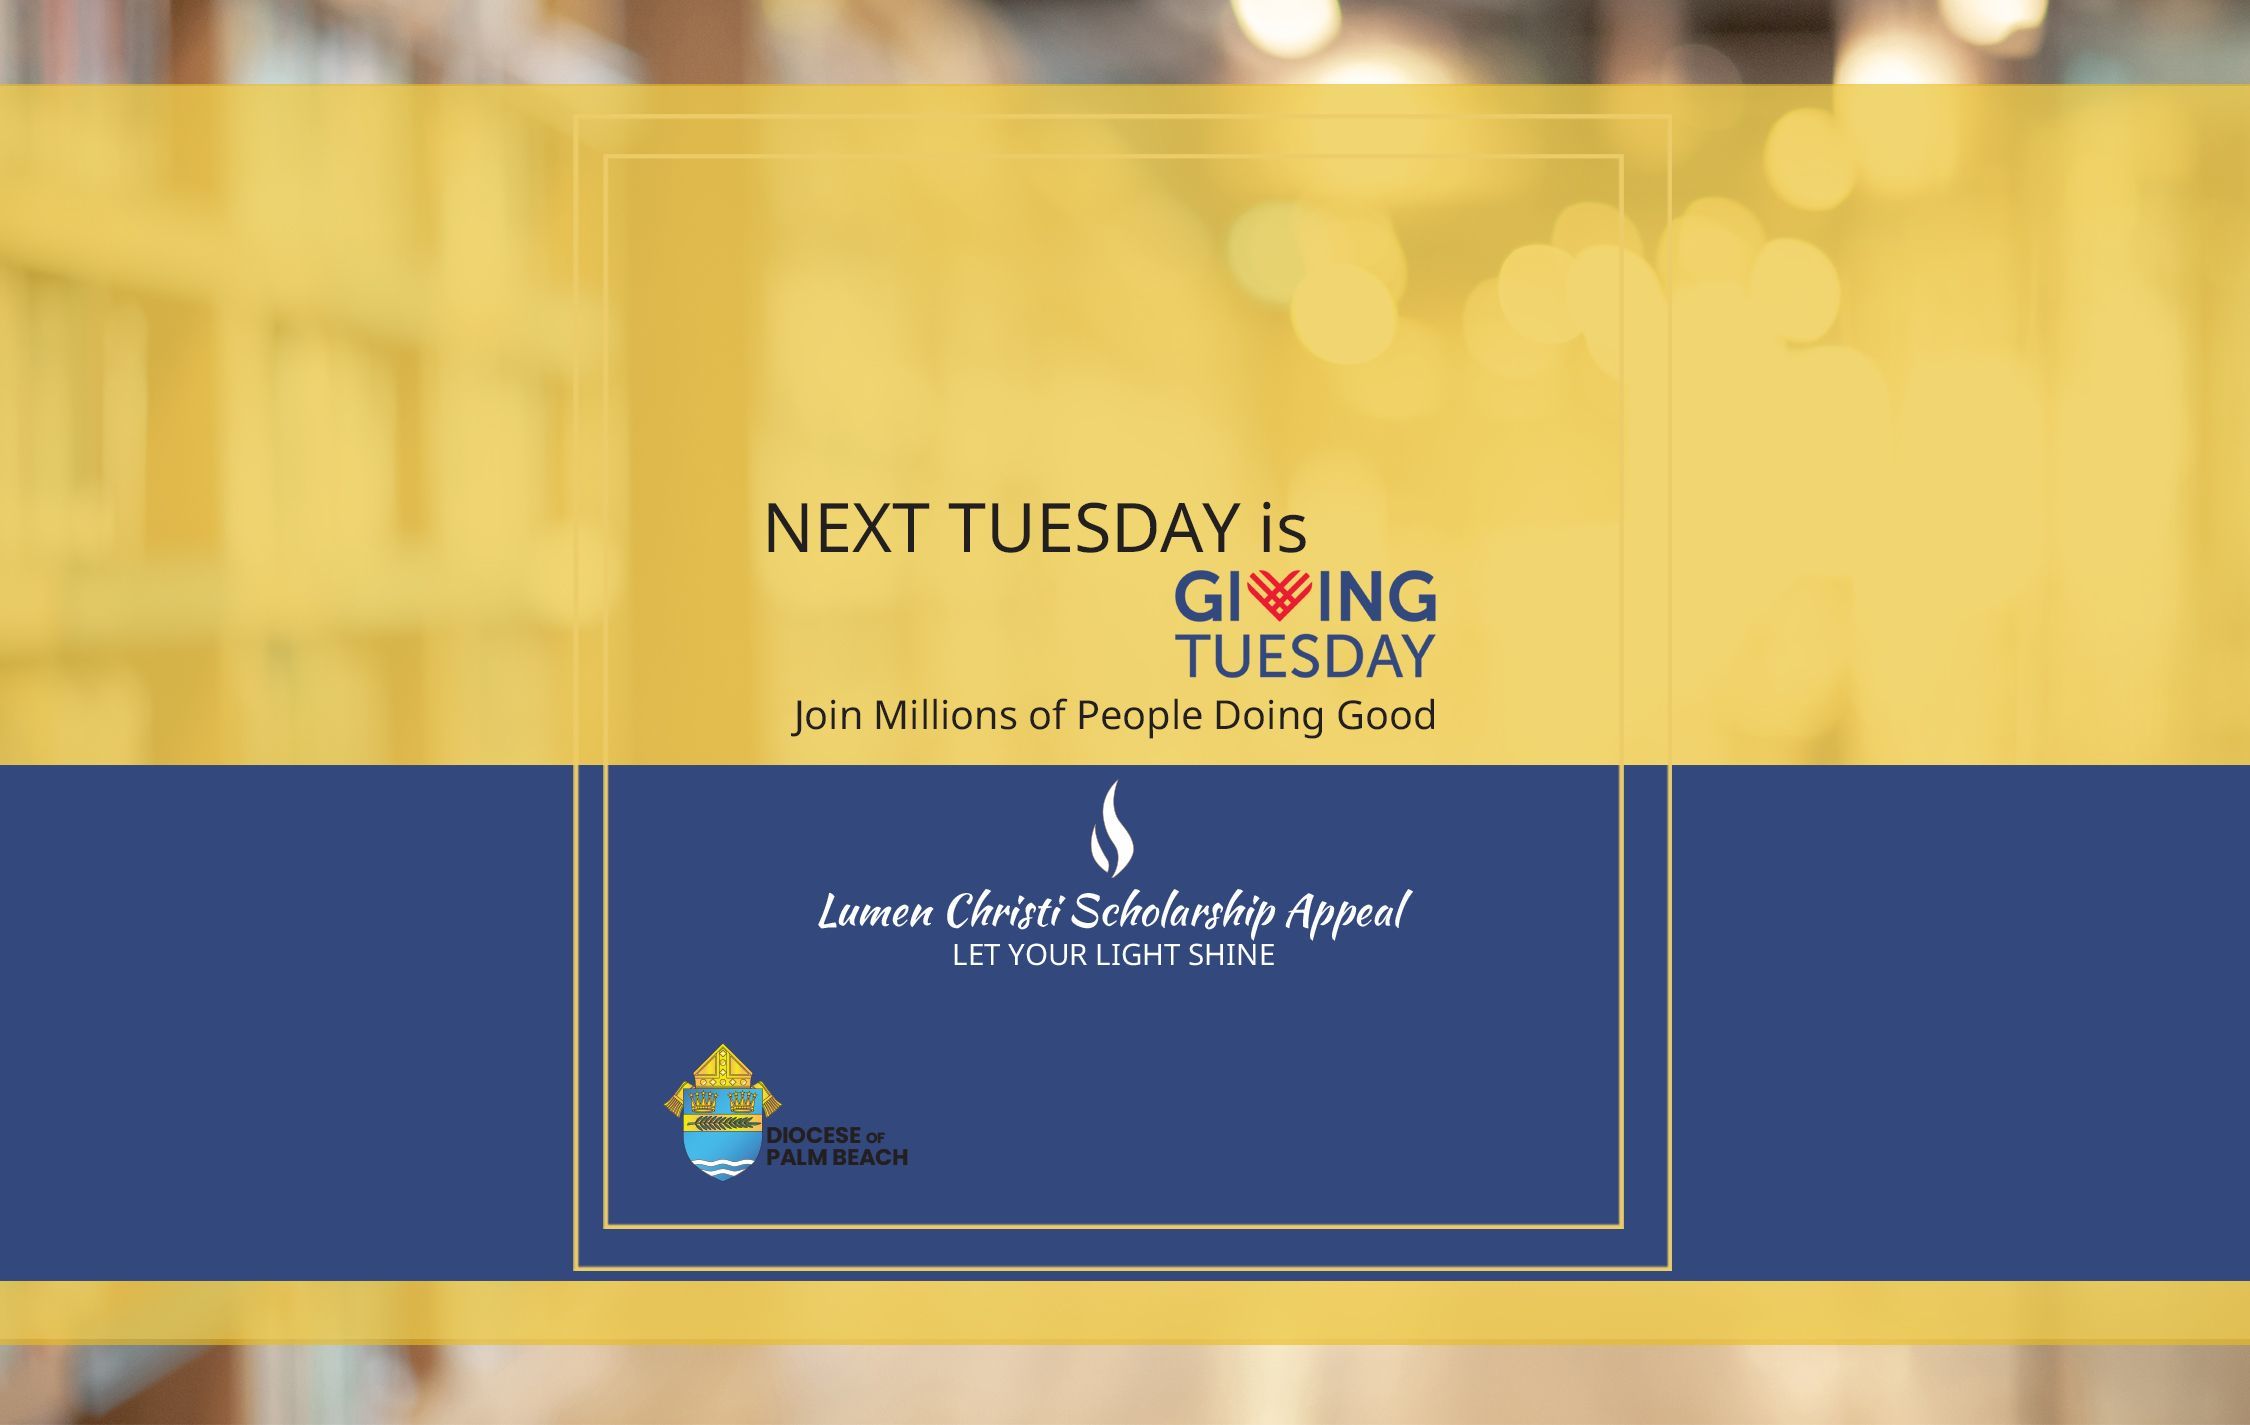 Next Tuesday is Giving Tuesday